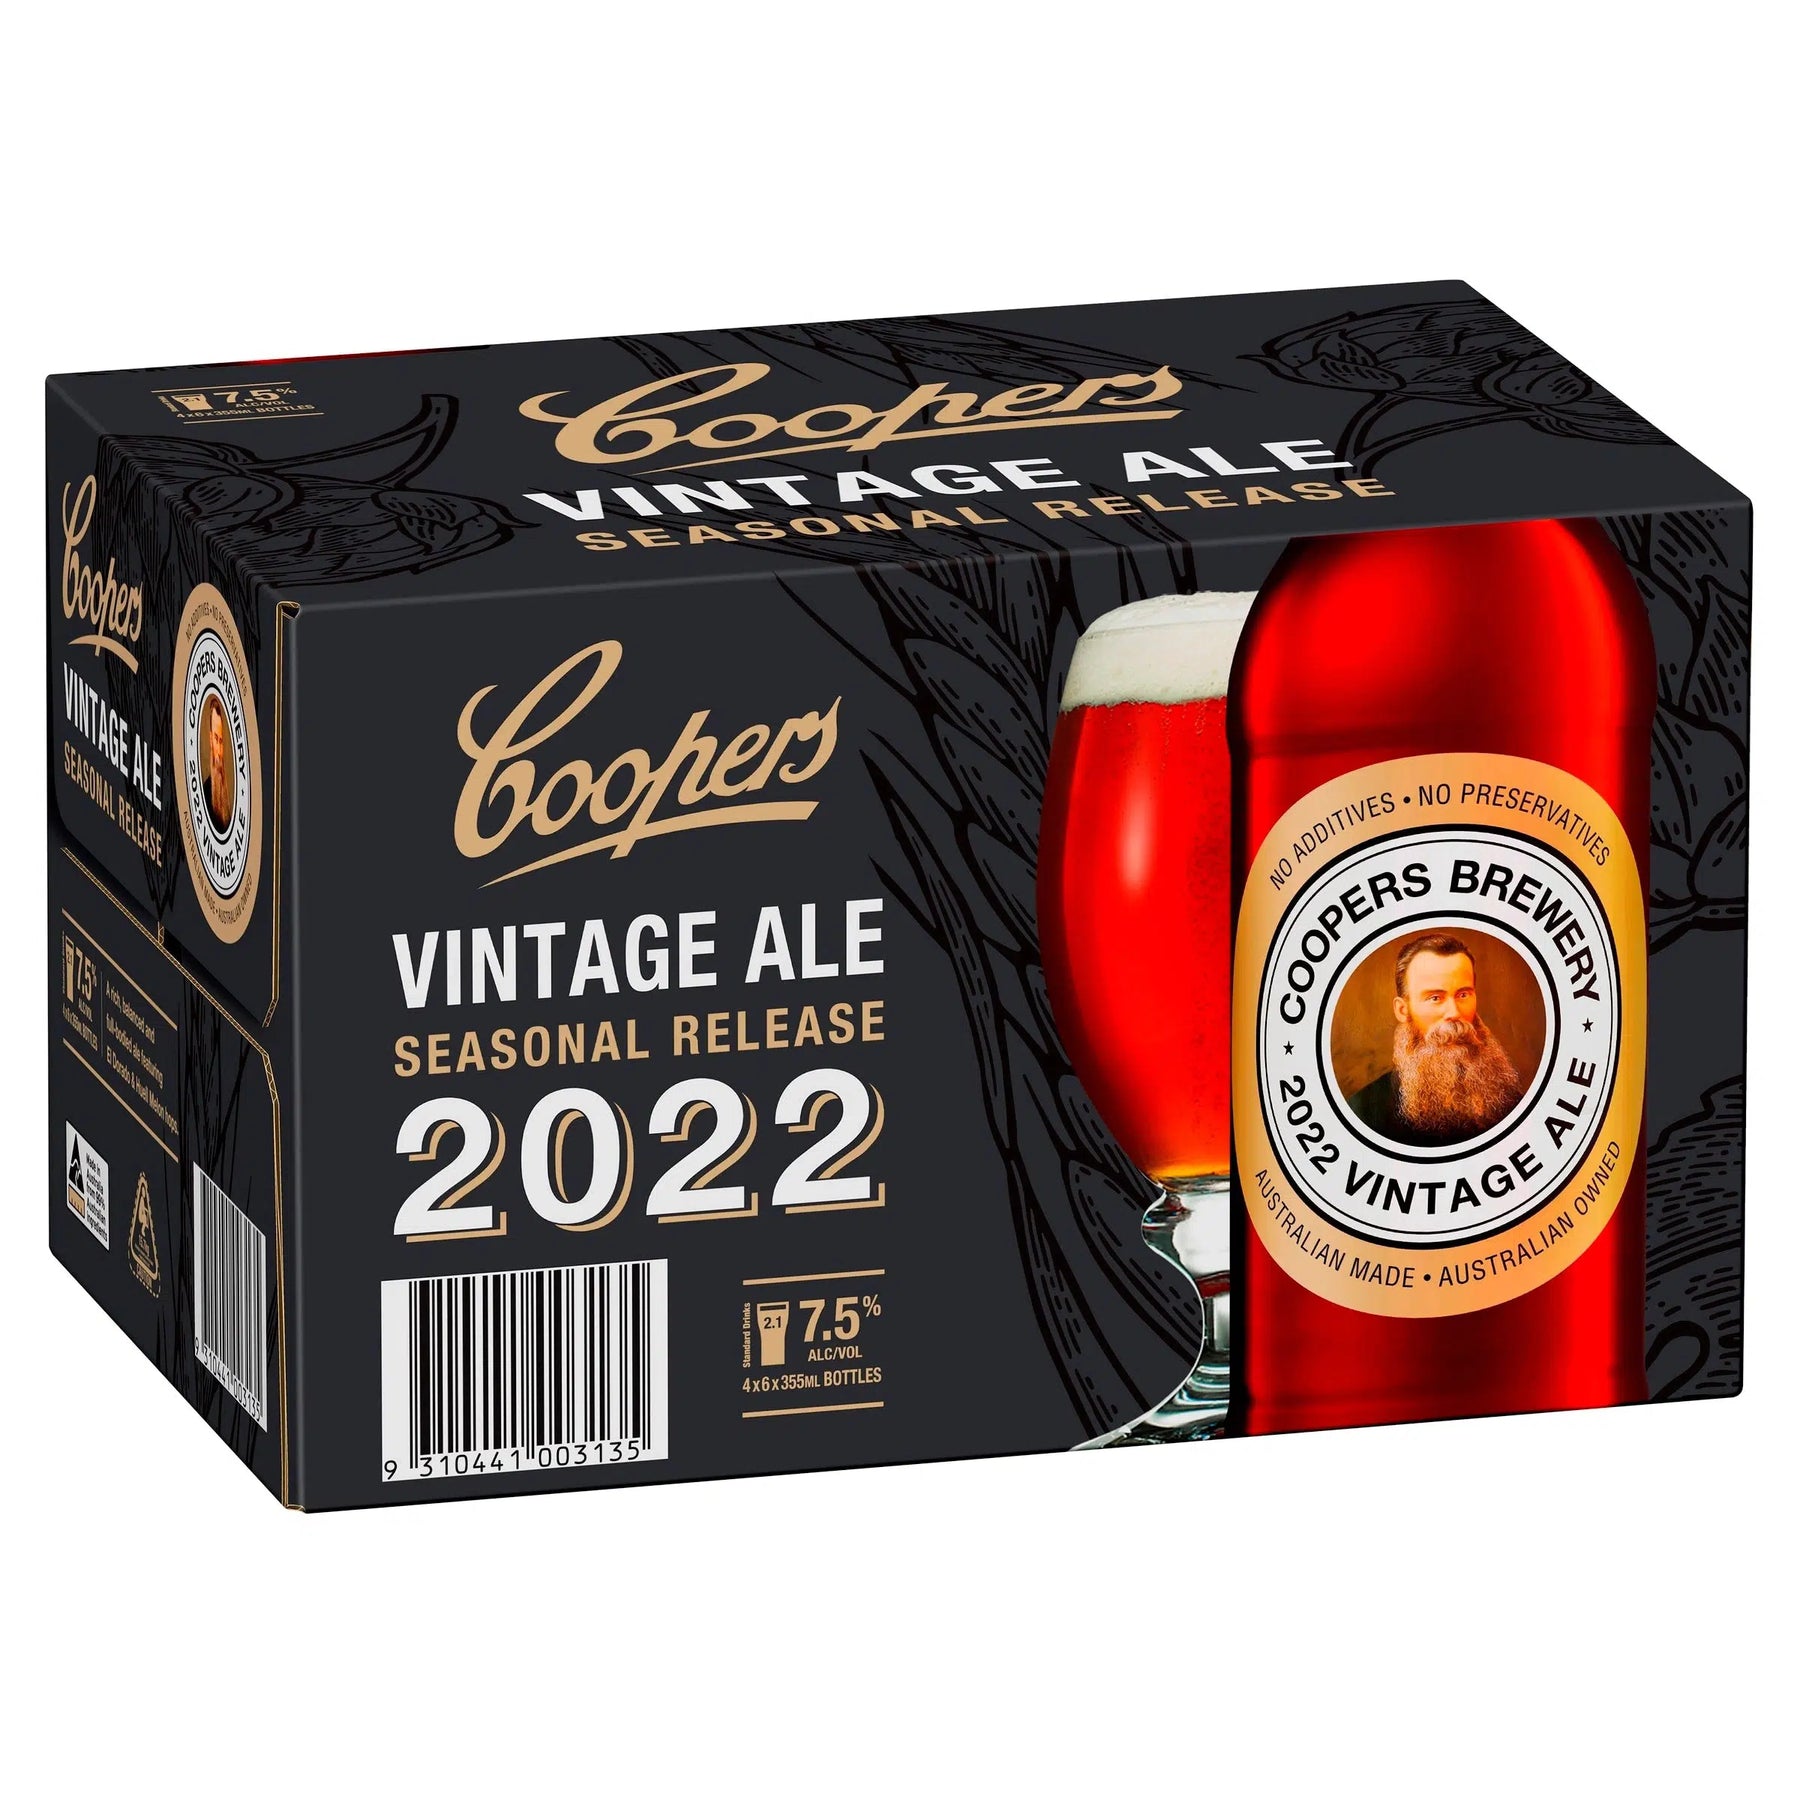 Coopers Vintage Ale Seasonal Release 2022 Limited Edition